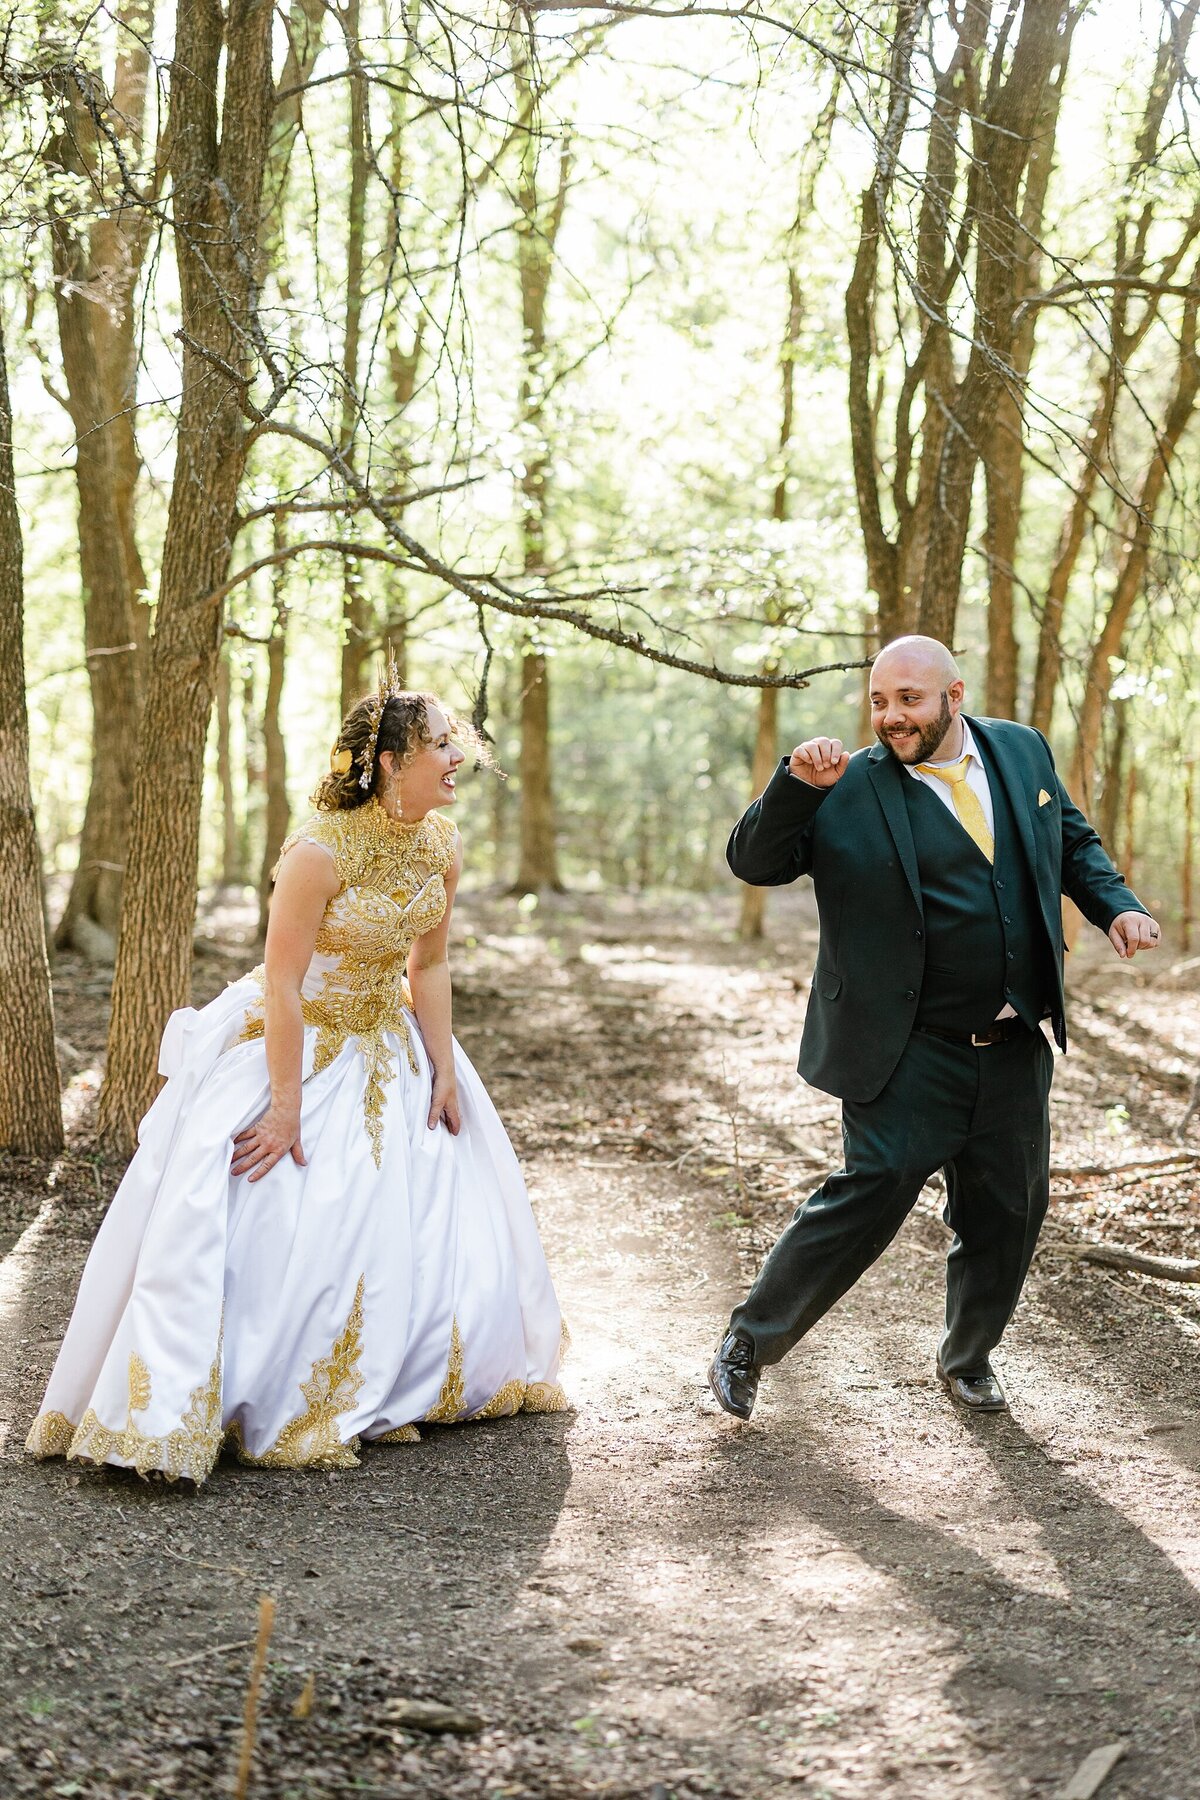 A portrait of a bride laughing while the groom is dancing playfully in a wooded setting after their backyard wedding ceremony in Fort Worth, Texas. The bride is on the left is a wearing an elaborately decorated white and gold dress with a golden sun crown. The groom is on the right and is wearing a dark green suit with a yellow tie and pocket square.